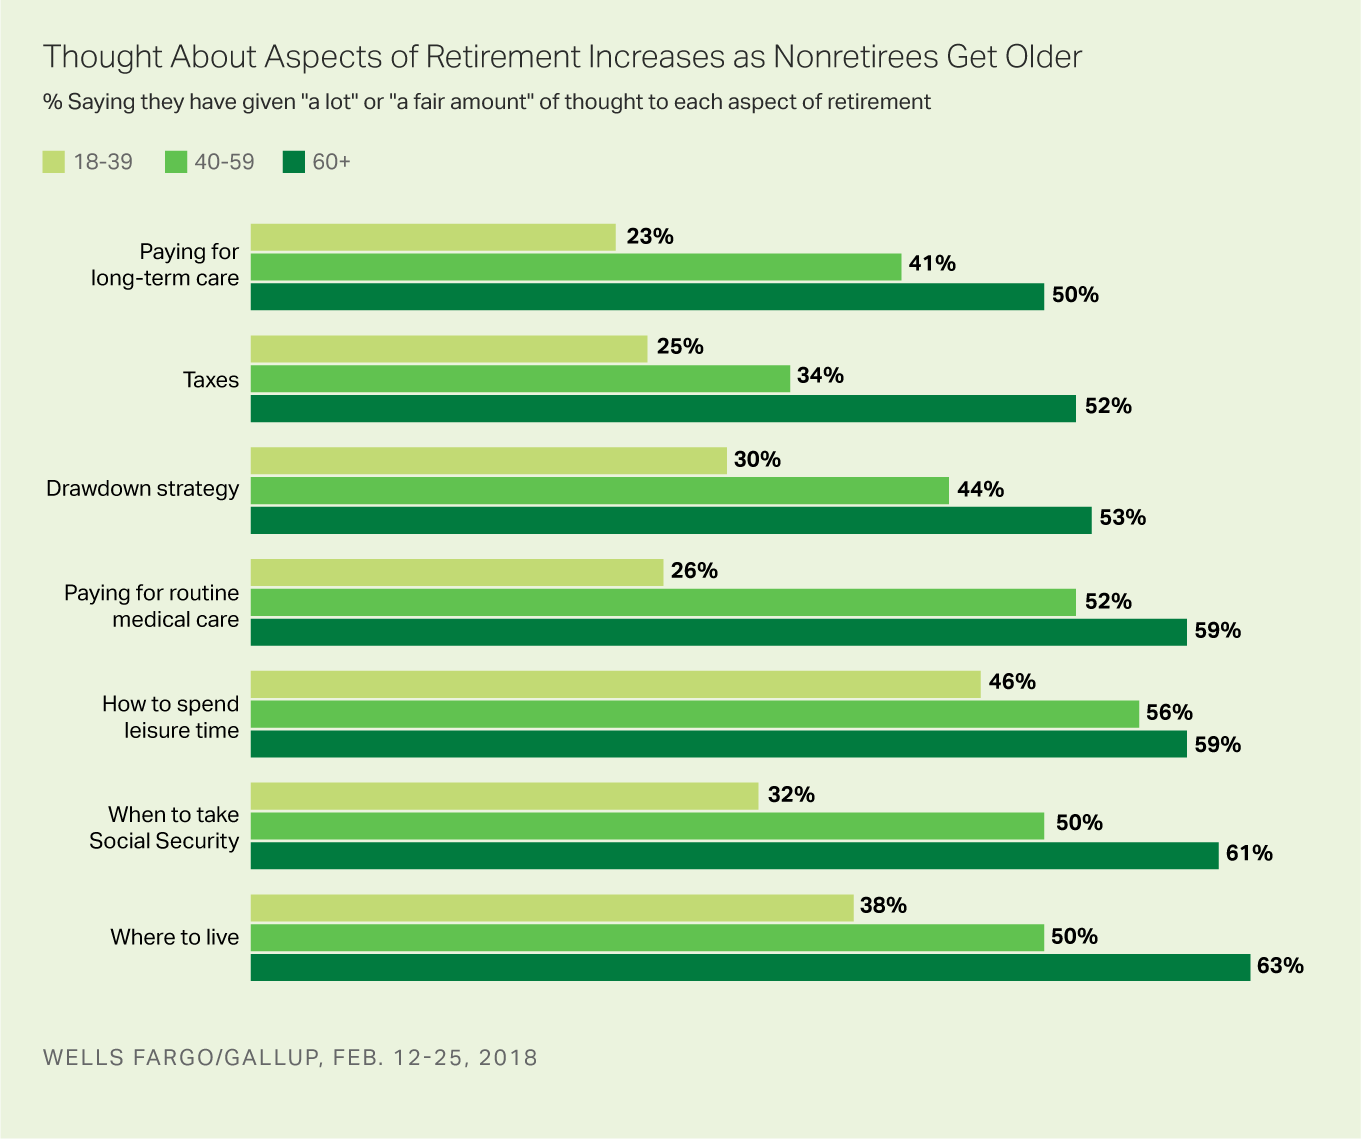 Bar graph: 3 age categories of investors and how much thought they have given to 7 aspects of retirement